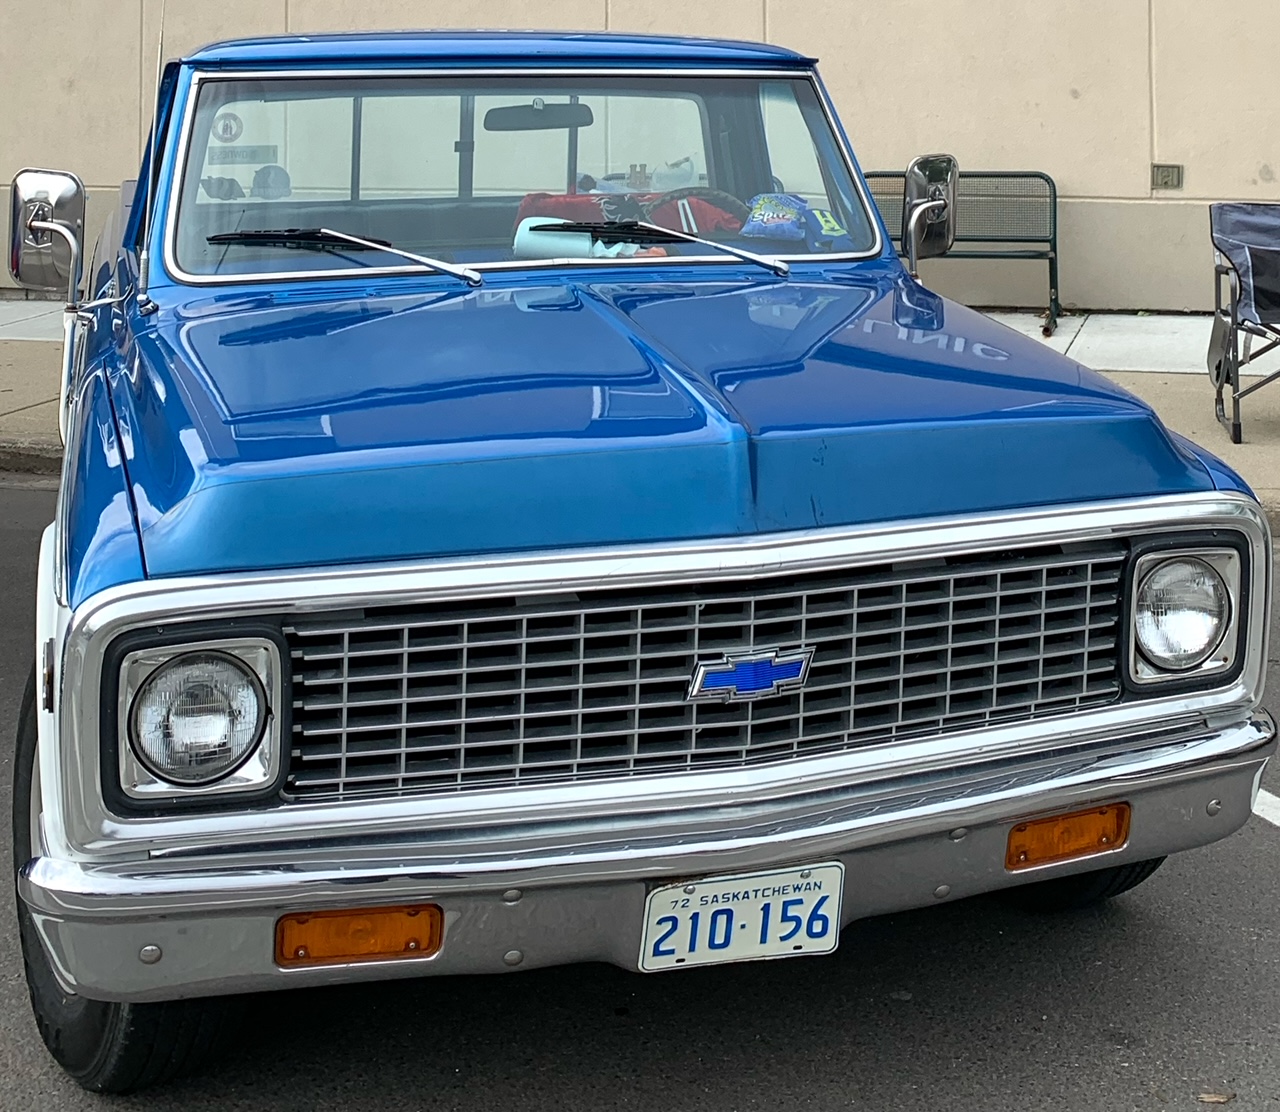 2019-image-72-Chev-Camper-Special-at-car-show